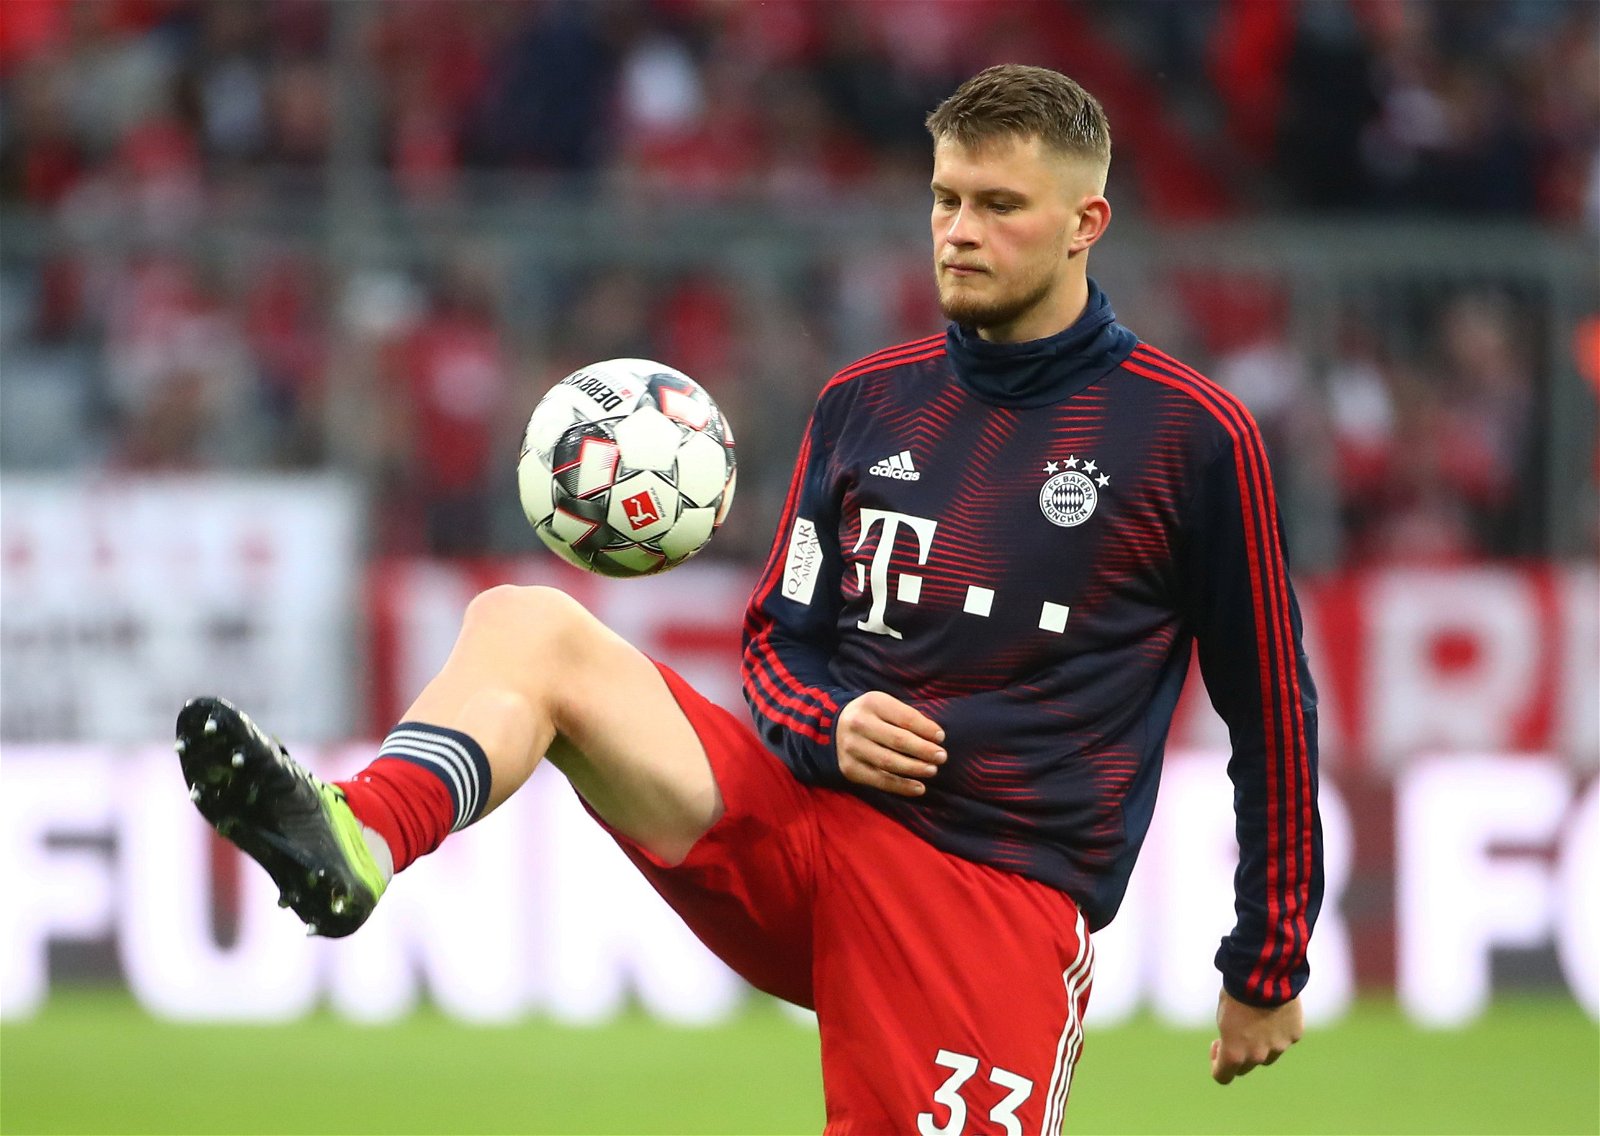 OFFICIAL Highly-rated defender Lars Lukas Mai renews Bayern Munich contract